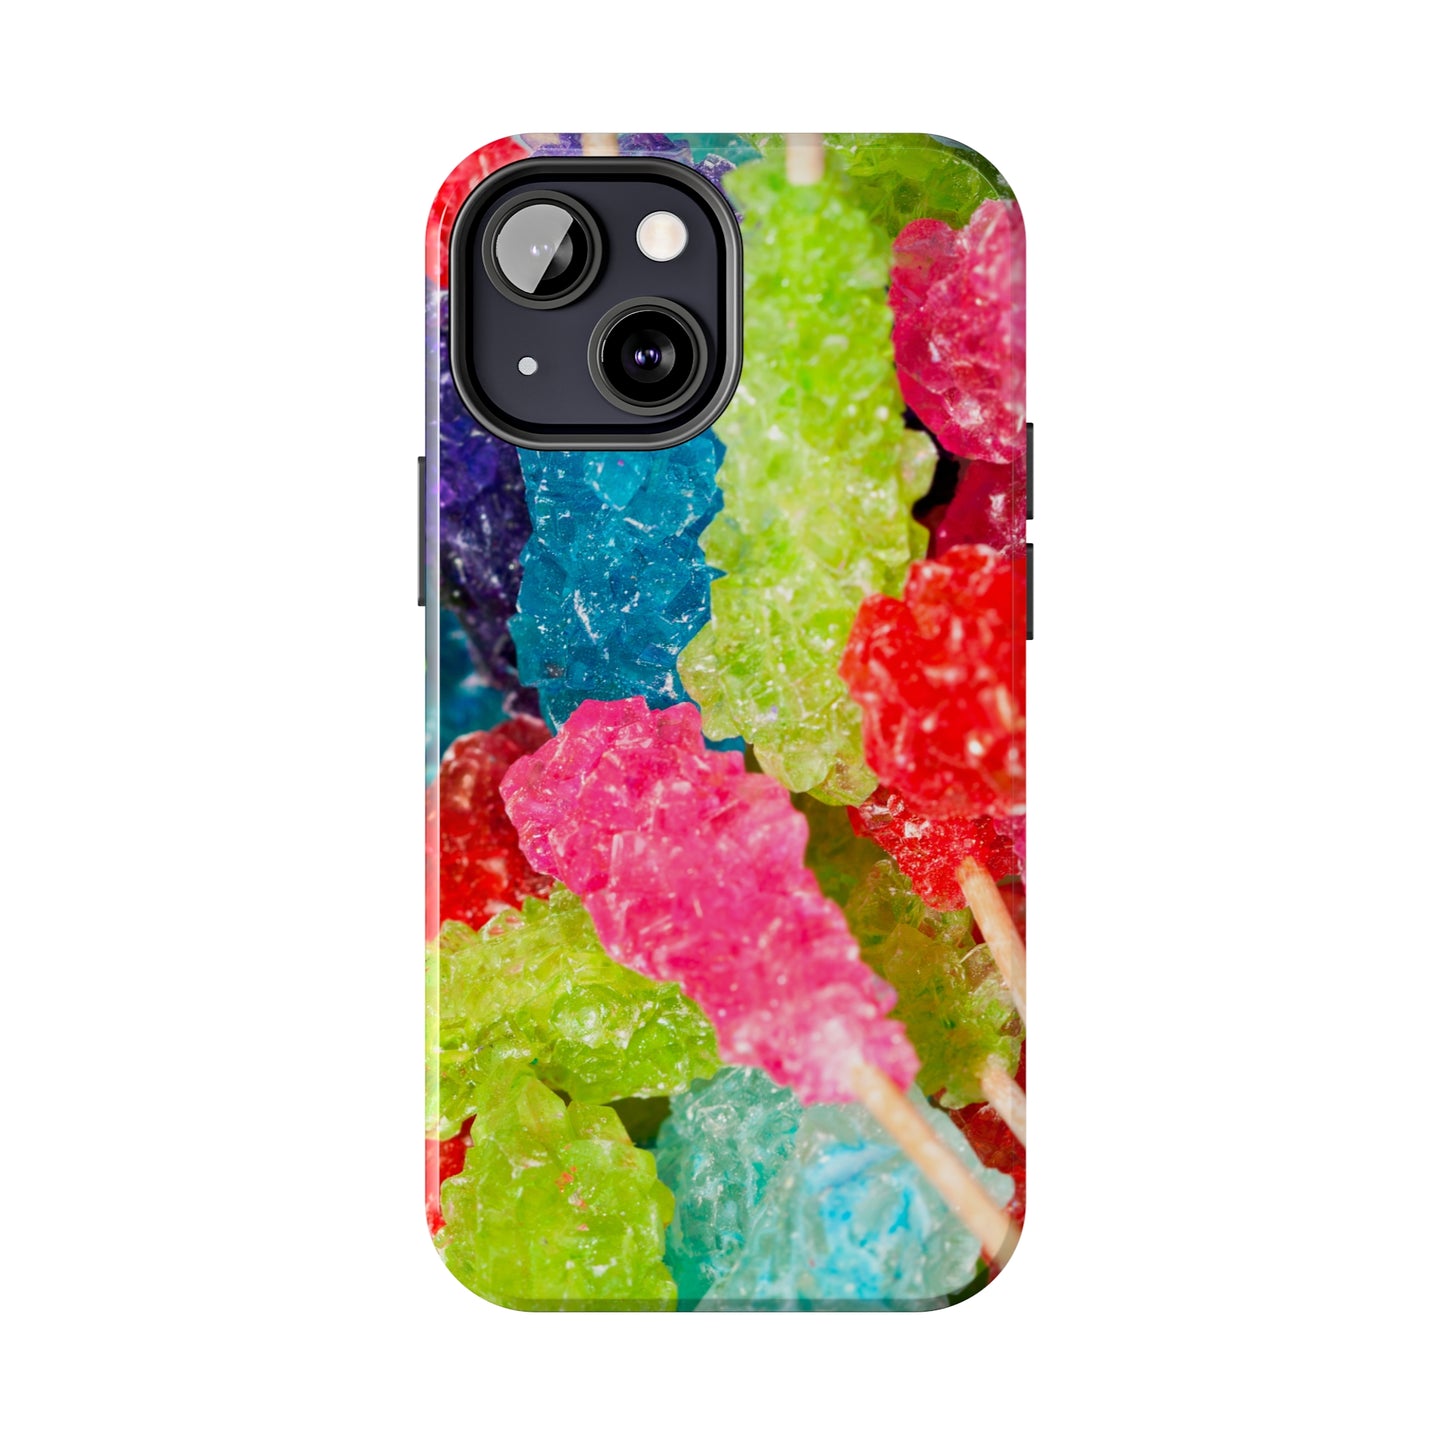 Rock Candy Phone Case